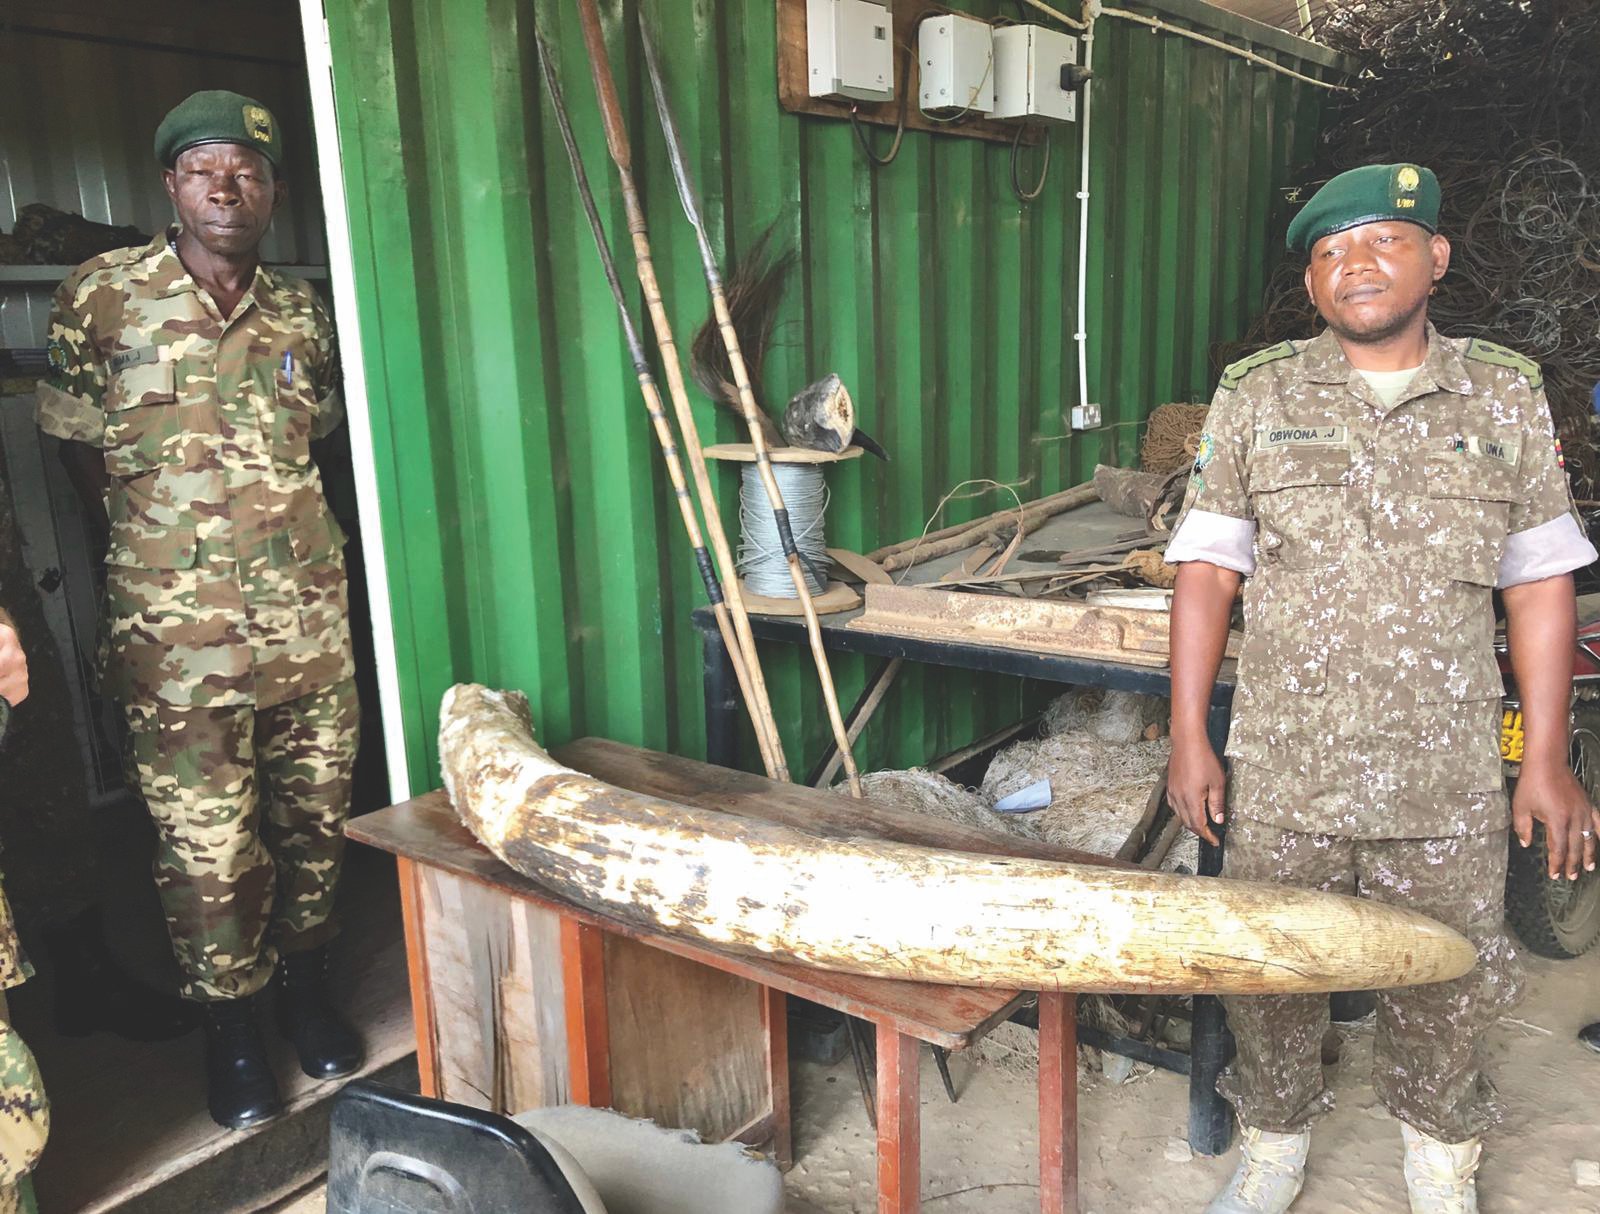 Elephant tusks are frequently confiscated from poachers.